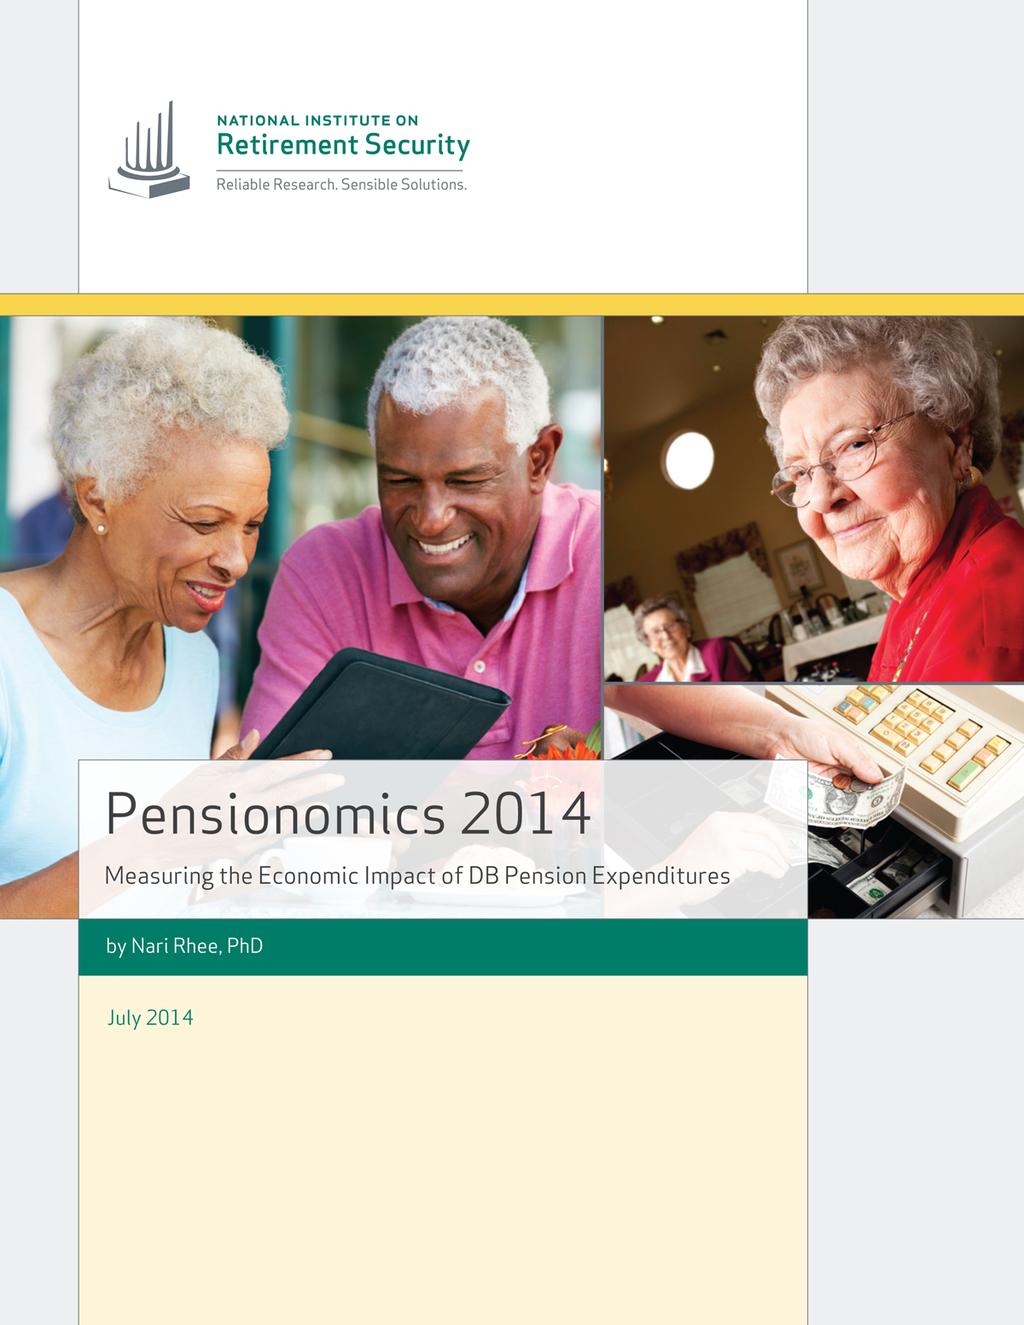 2014 Pensionomics: Retirees Spending DB Benefits Support Nationally Over $940 billion in economic output Over